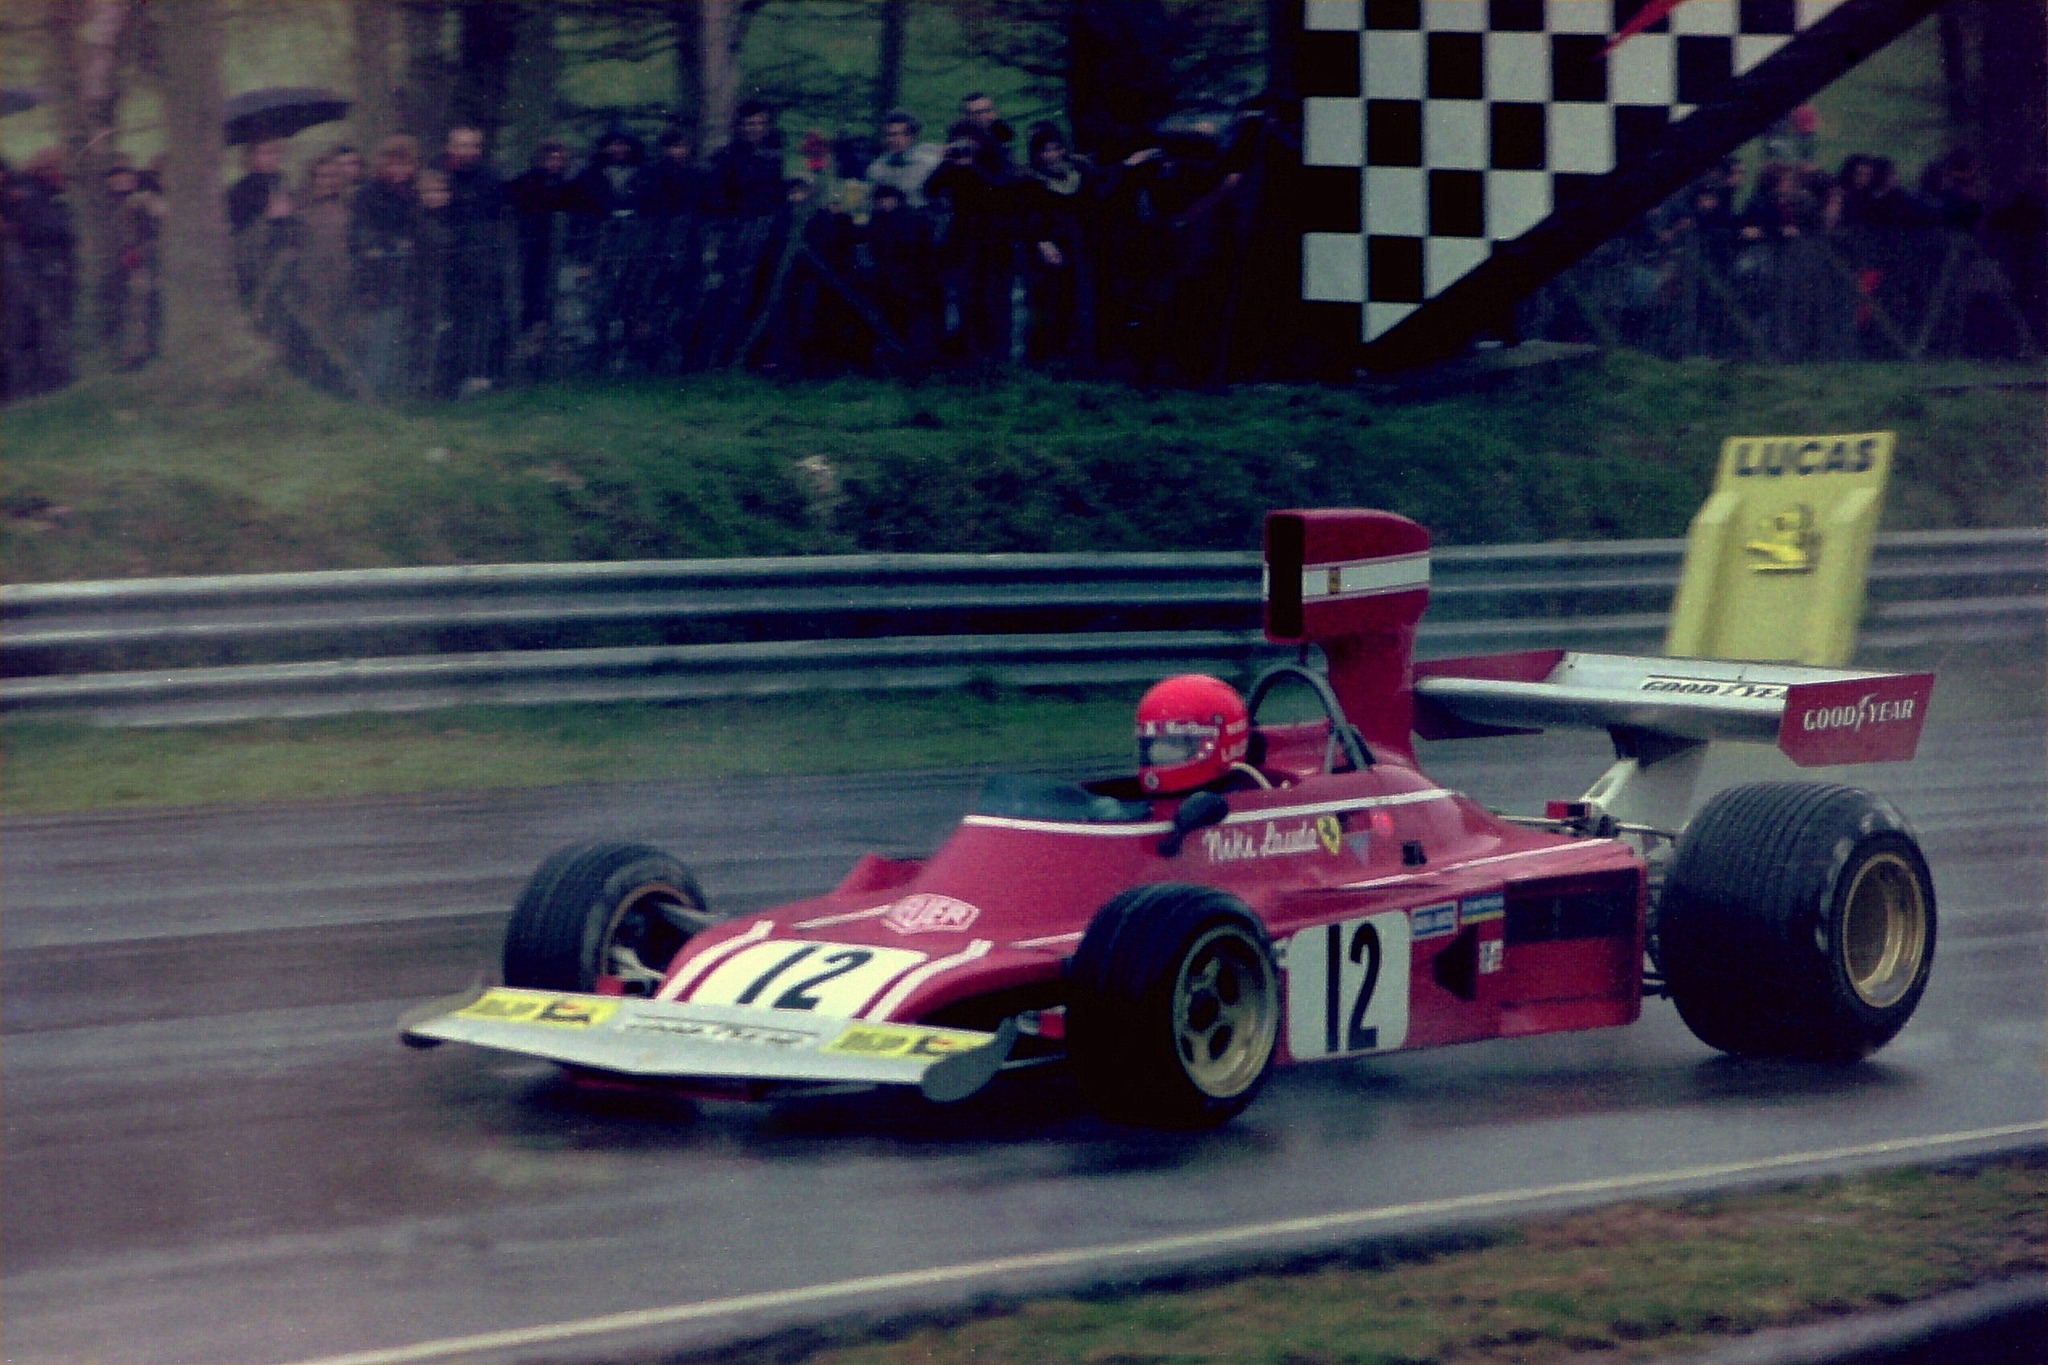 Niki Lauda at the Race of Champions, a non-championship Formula One race held at Brands Hatch on 17 March 1974.